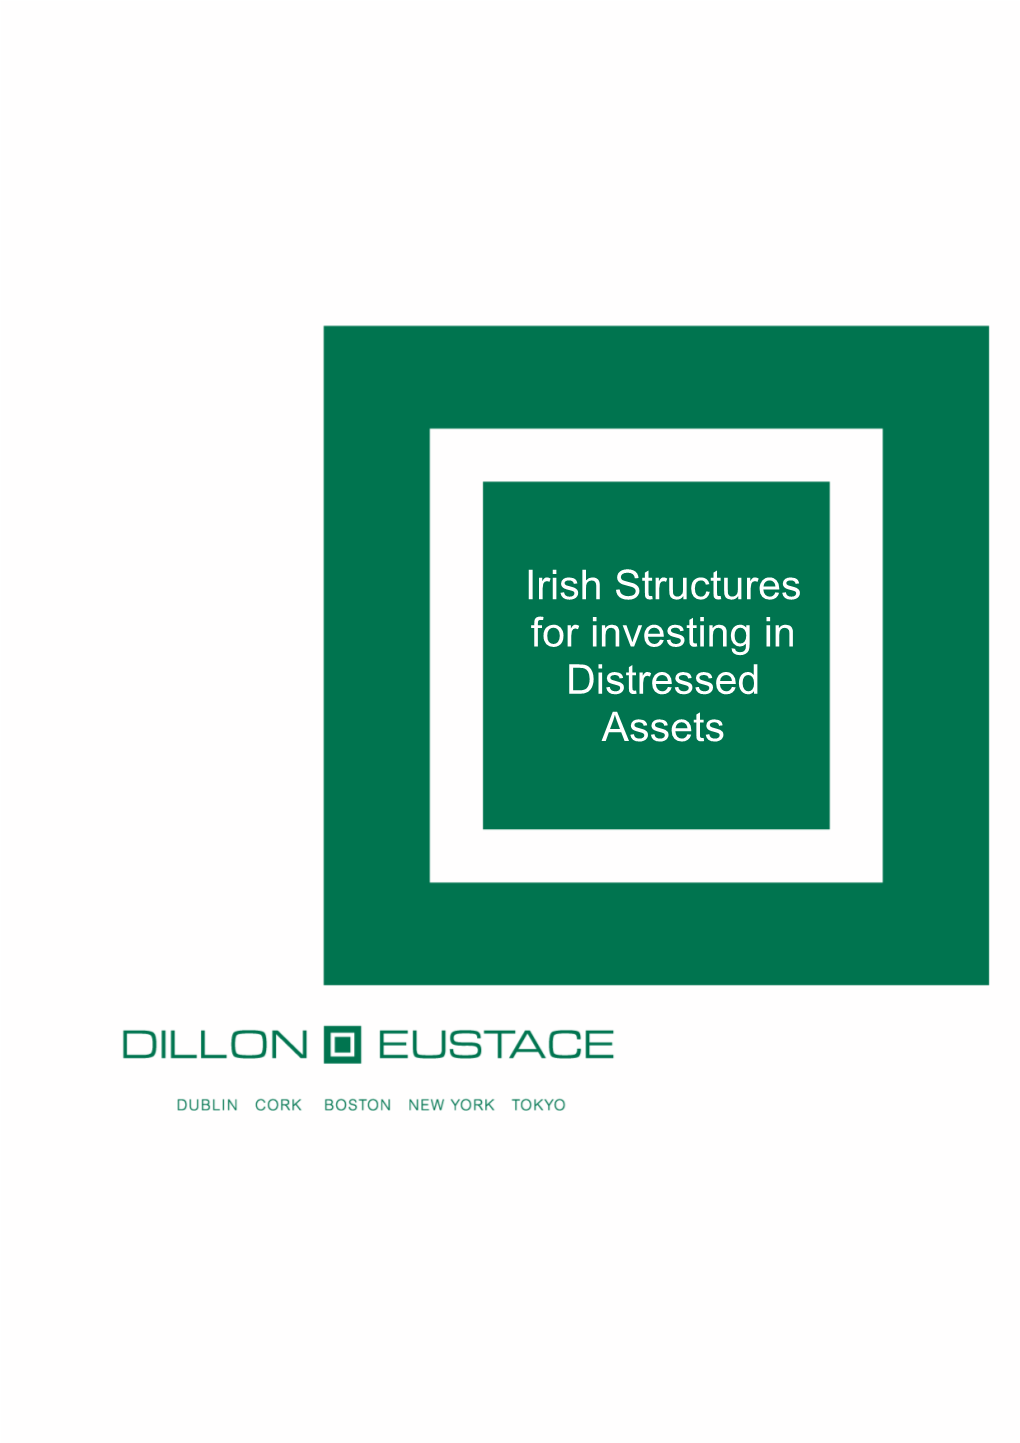 Irish Structures for Investing in Distressed Assets